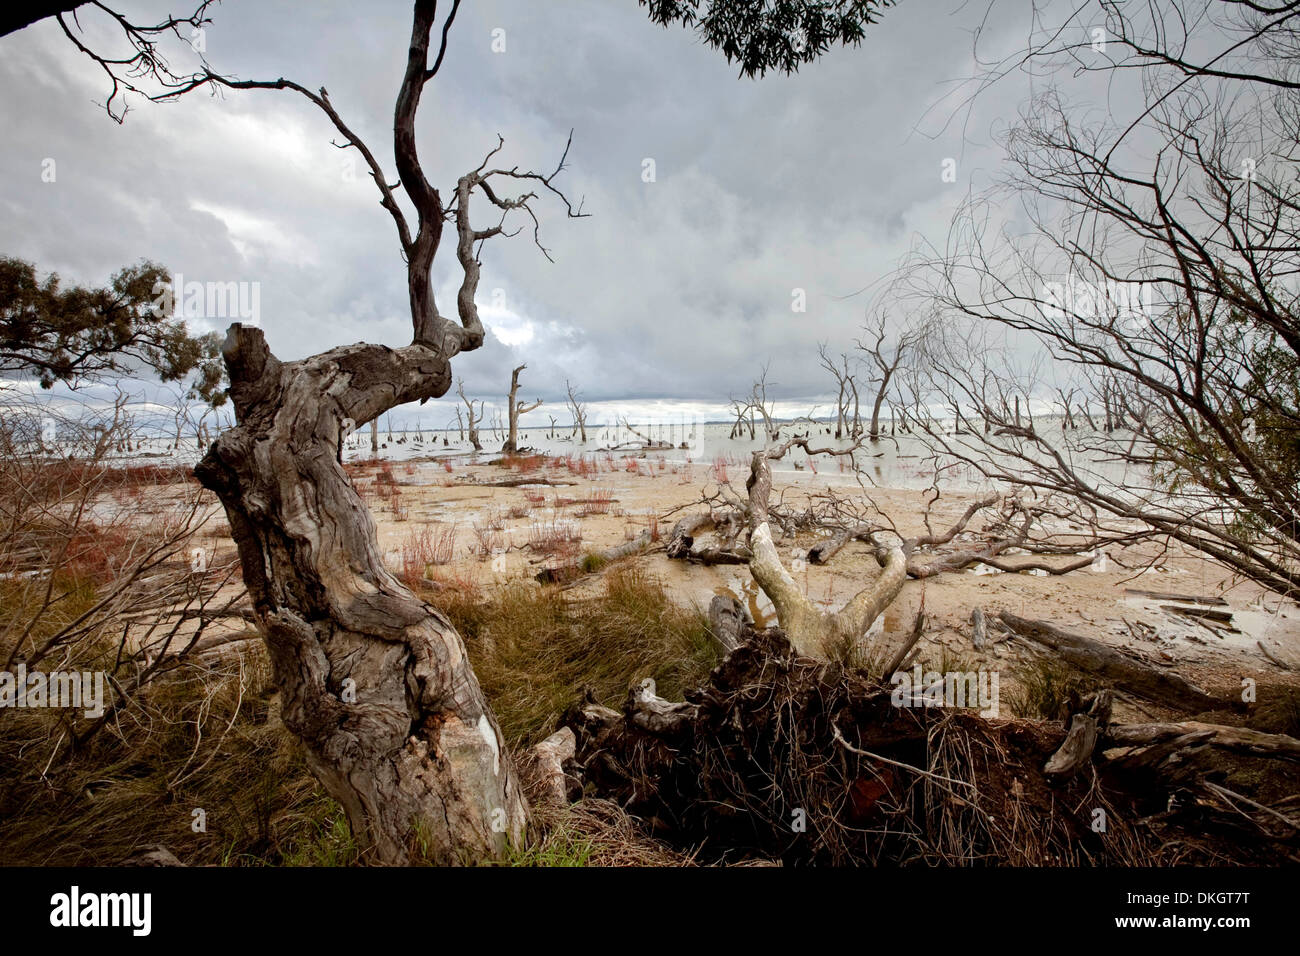 Wetlands of Kow Swamp, suffering from the affects of drought and under grey stormy sky near Kerang in Victoria, Australia Stock Photo